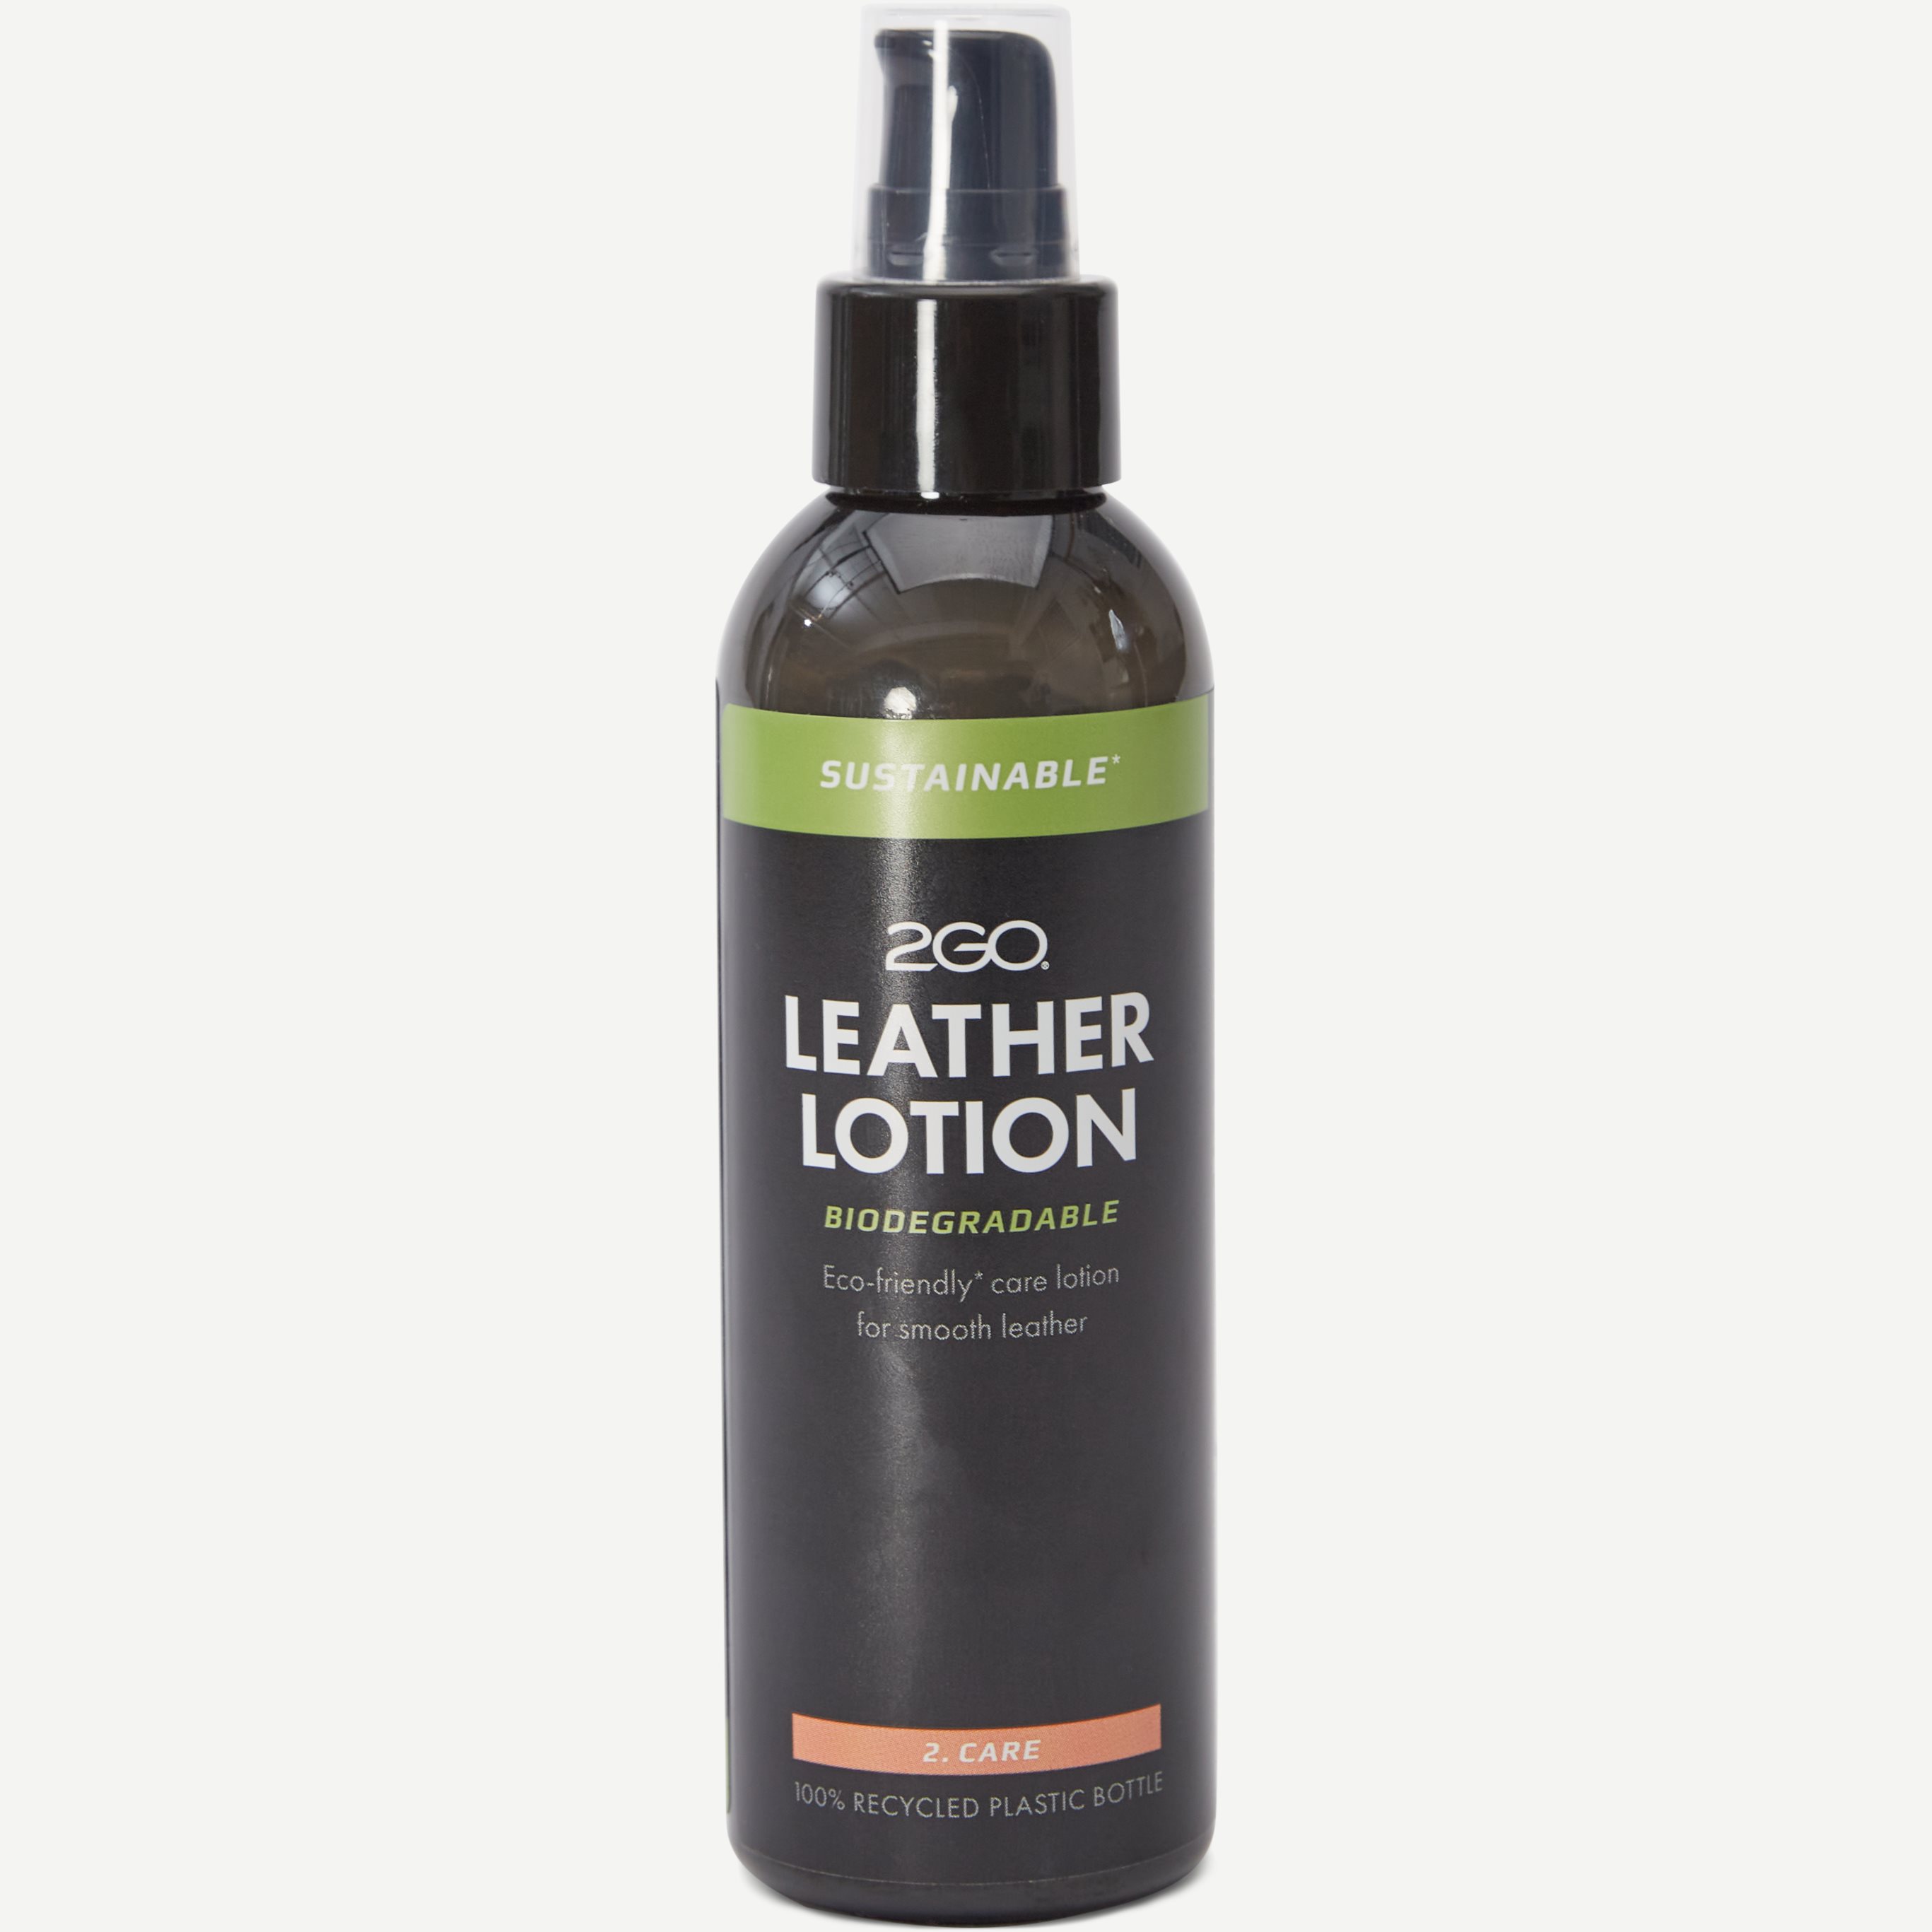 Woly Protector Accessories 2GO LEATHER LOTION Hvid